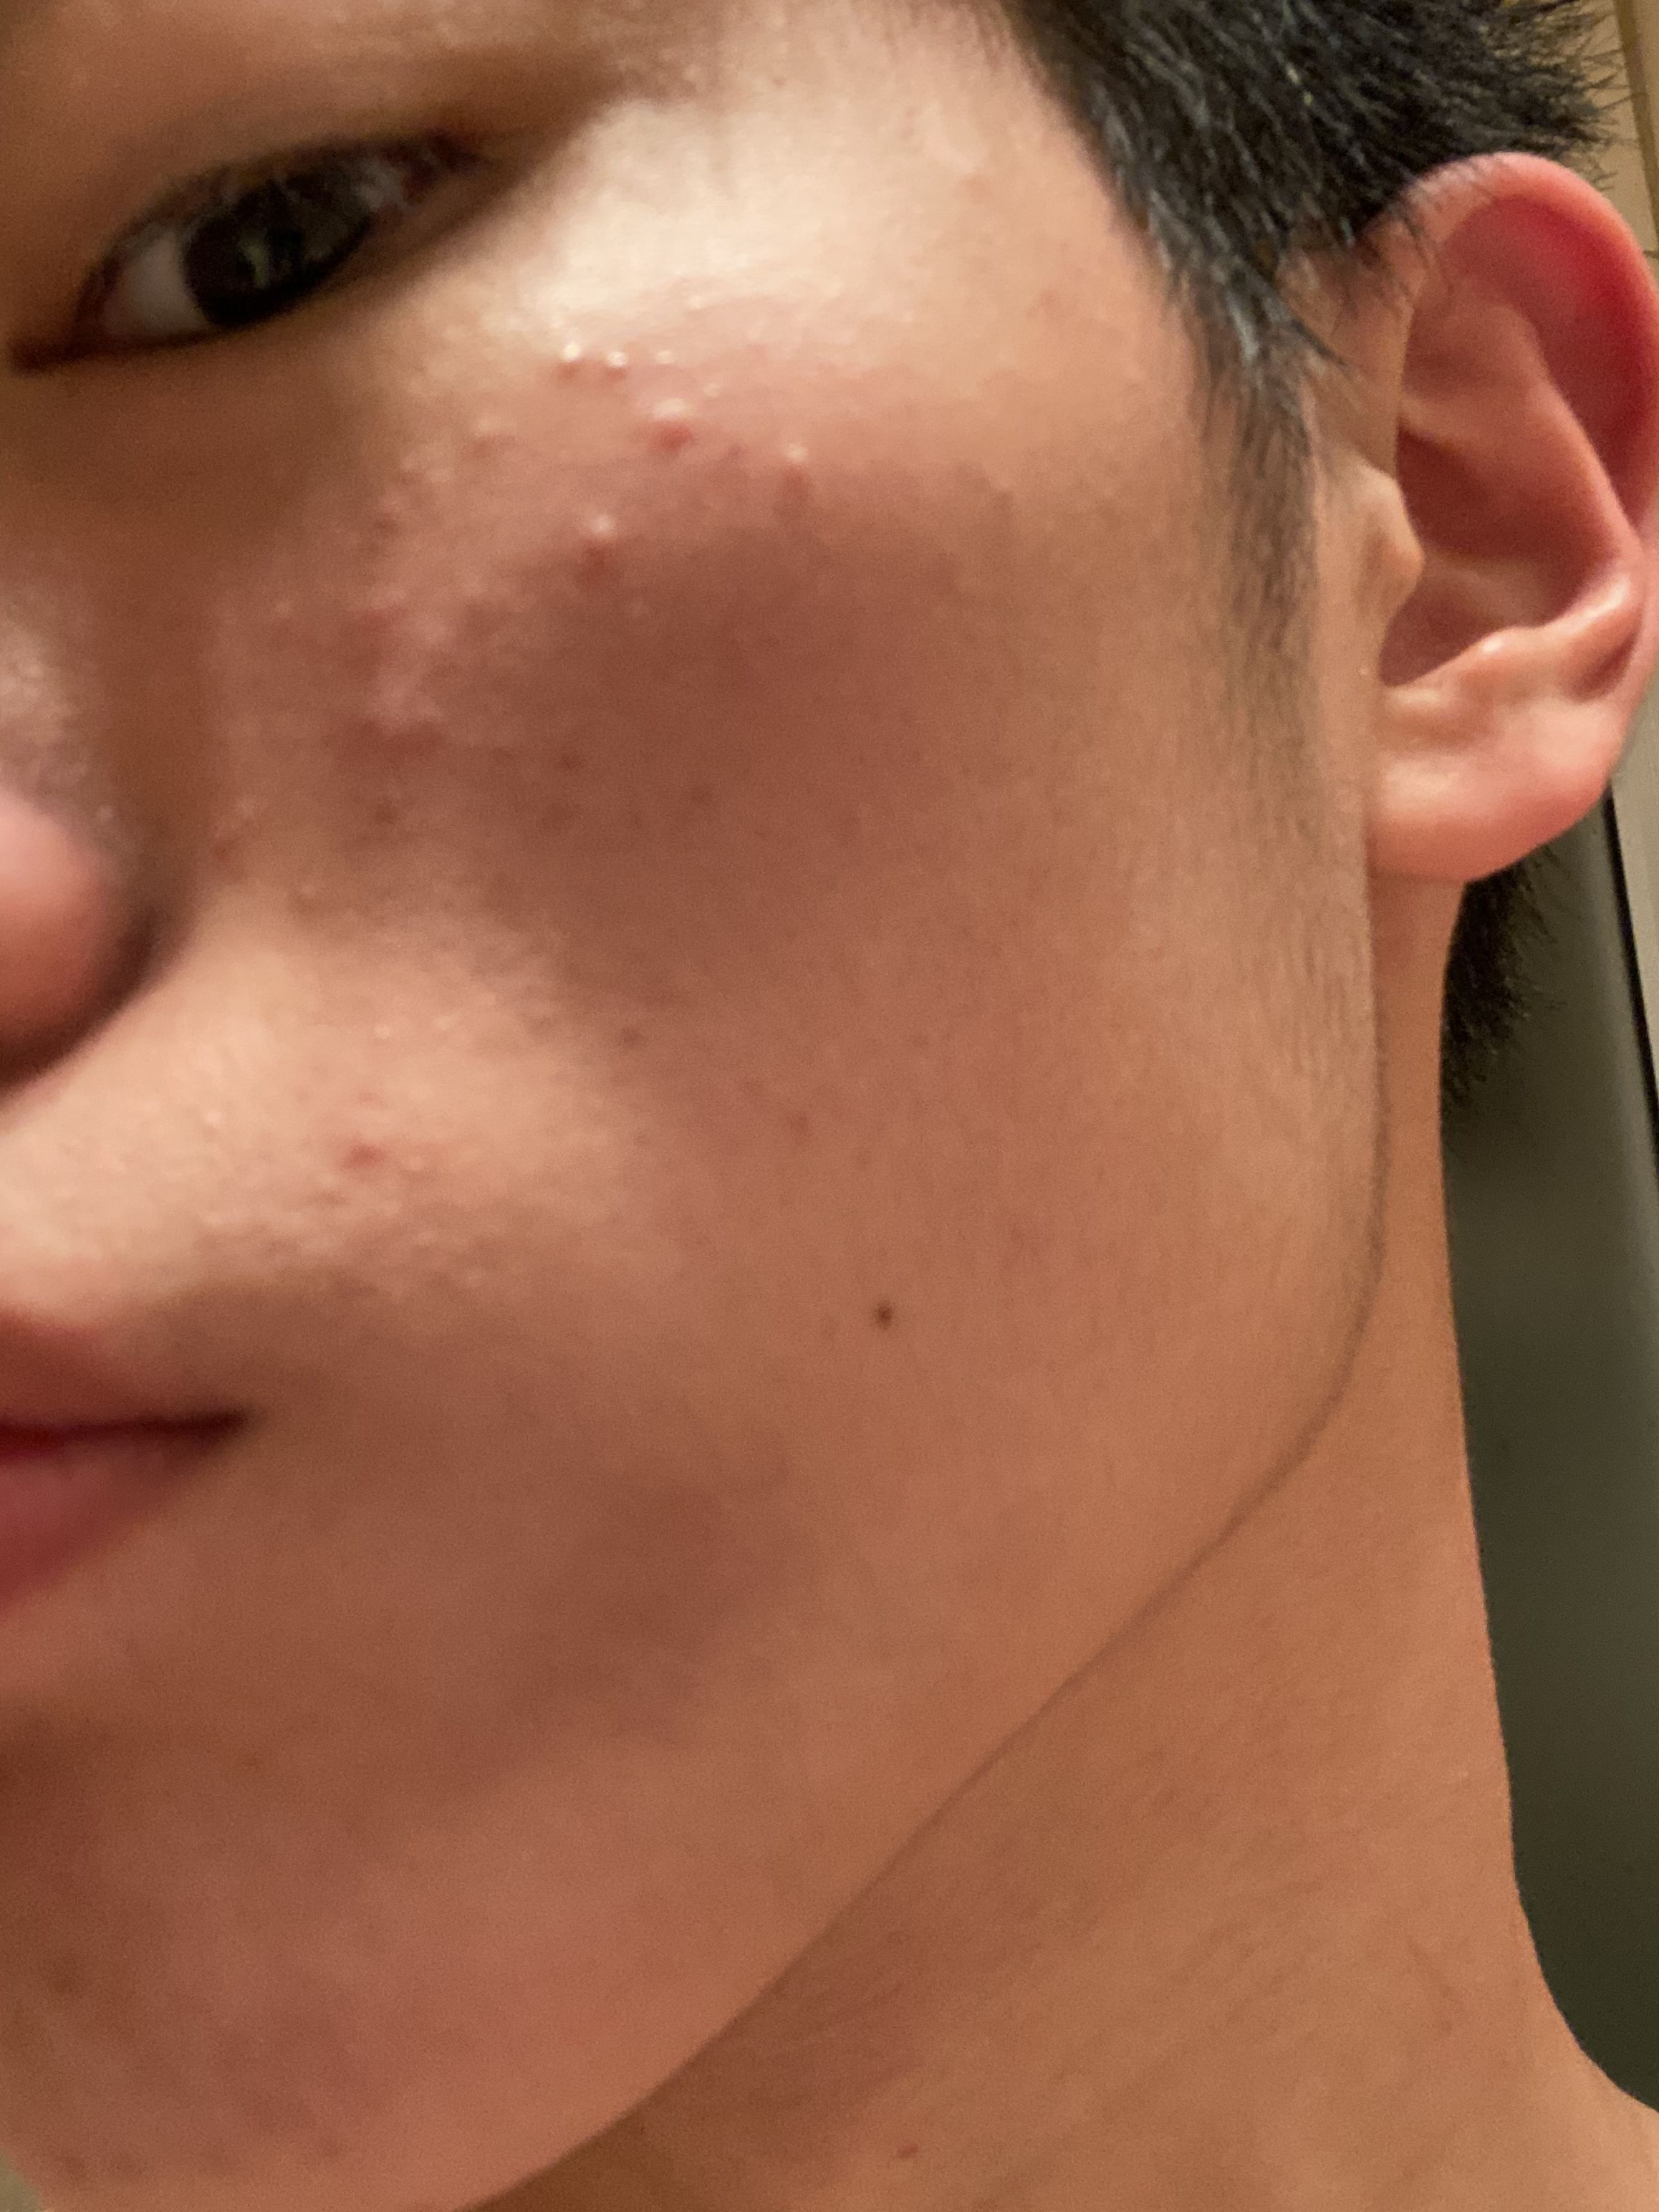 Mild Acne Please Help - General acne discussion - Acne.org